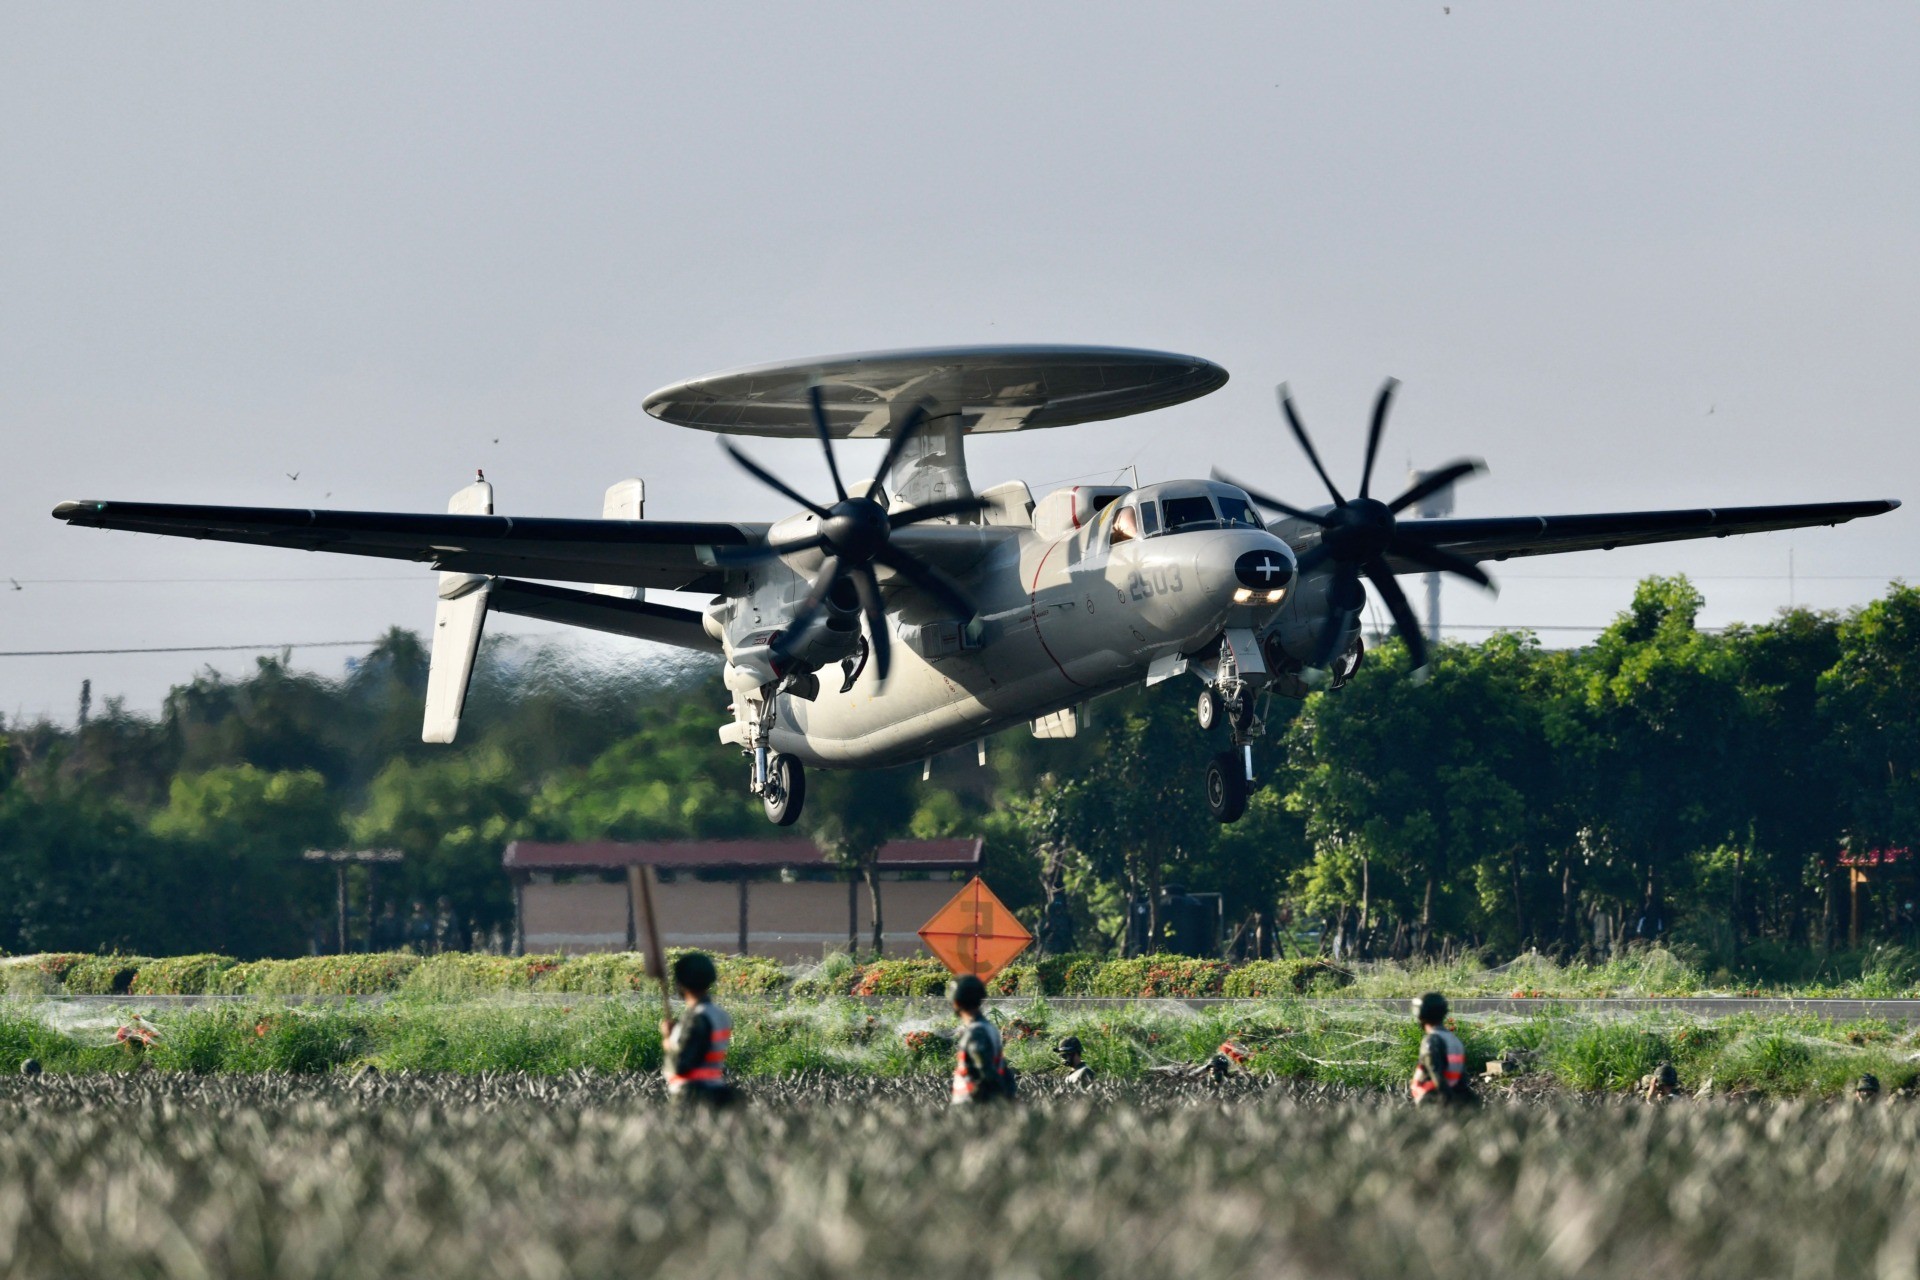 A US-made E2K Early Warning Aircraft (EWA) takes off from a motorway in Pingtung, southern Taiwan, during the annual Han Kuang drill on September 15, 2021. (Photo by Sam Yeh / AFP) (Photo by SAM YEH/AFP via Getty Images)